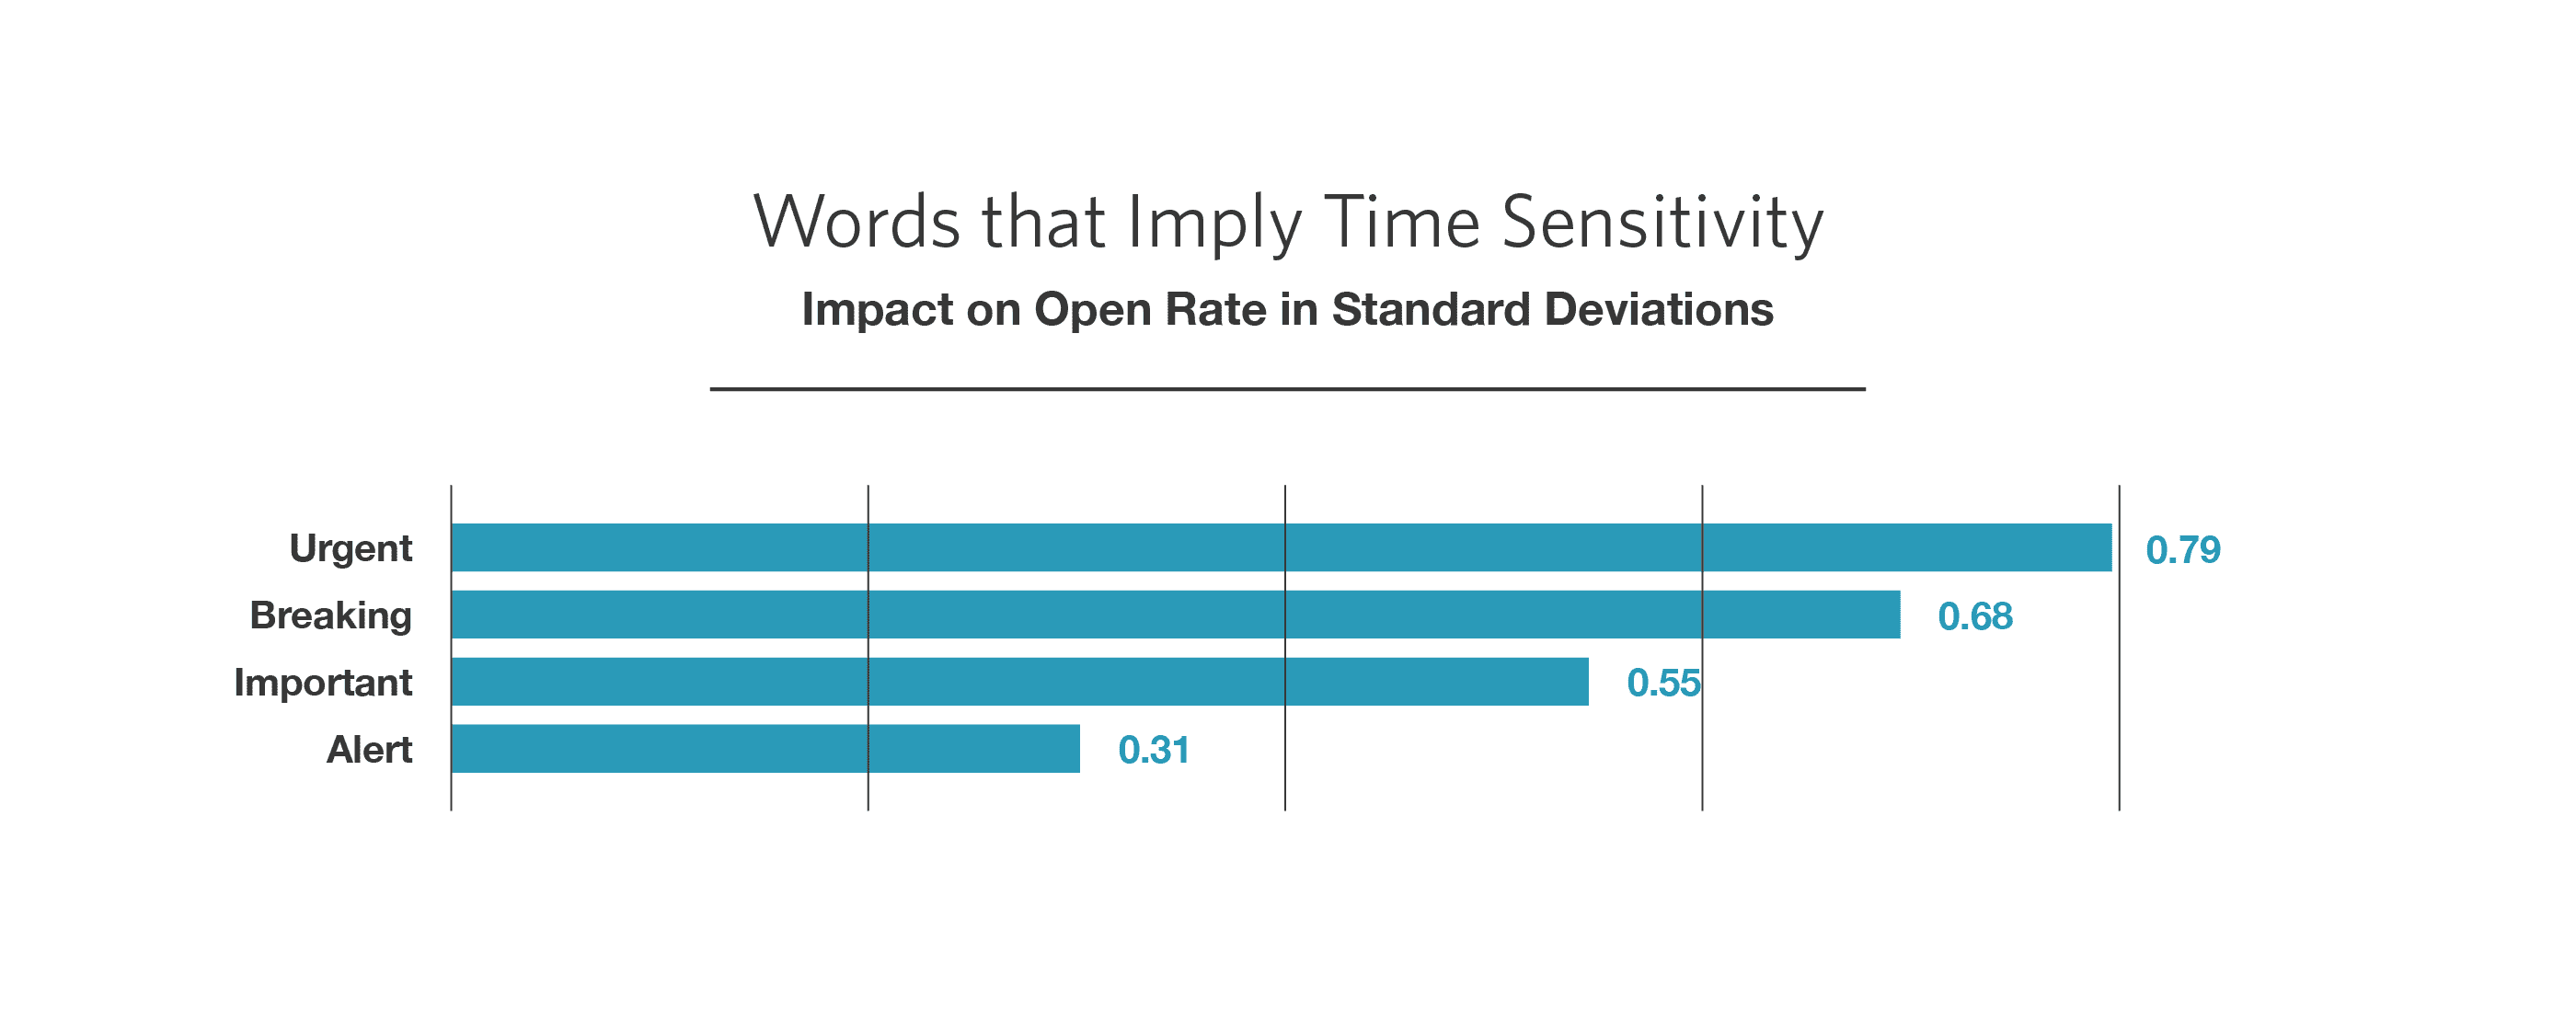 Make it urgent! Implying time sensitivity increases open rates. Just maybe not say something is urgent ... when it isn't